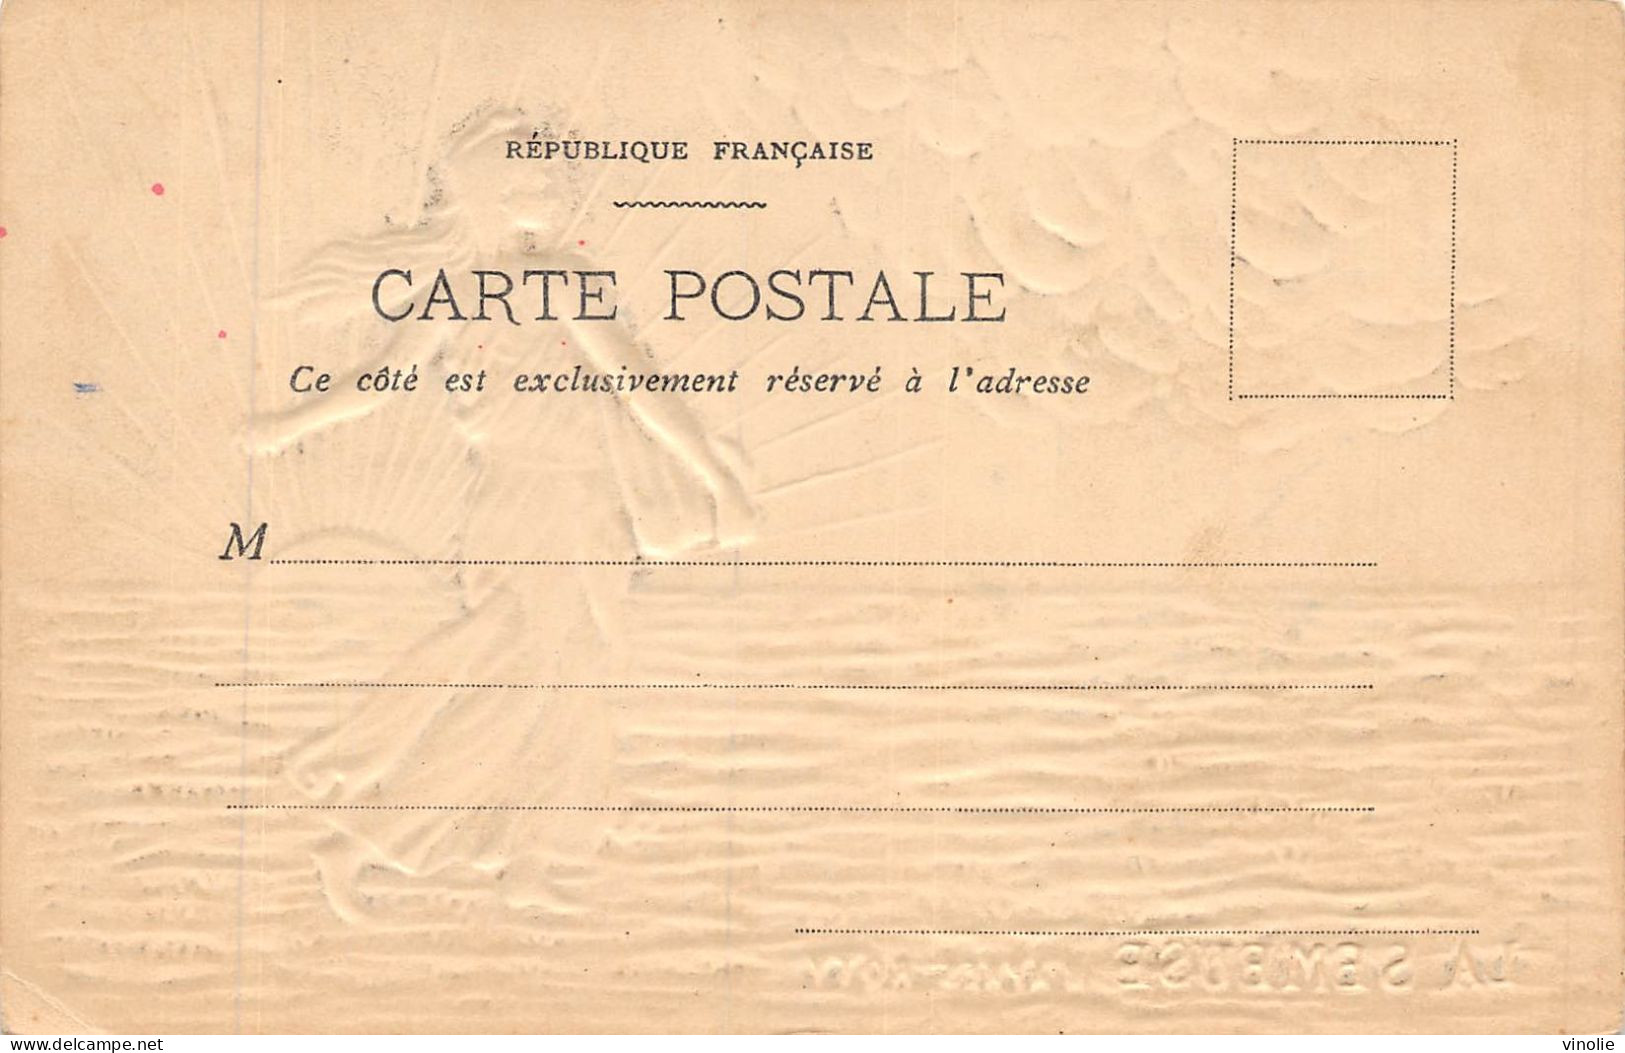 P-24-Mi-Is-2224 : CARTE GAUFREE SEMEUSE DE ROTY. - Stamps (pictures)